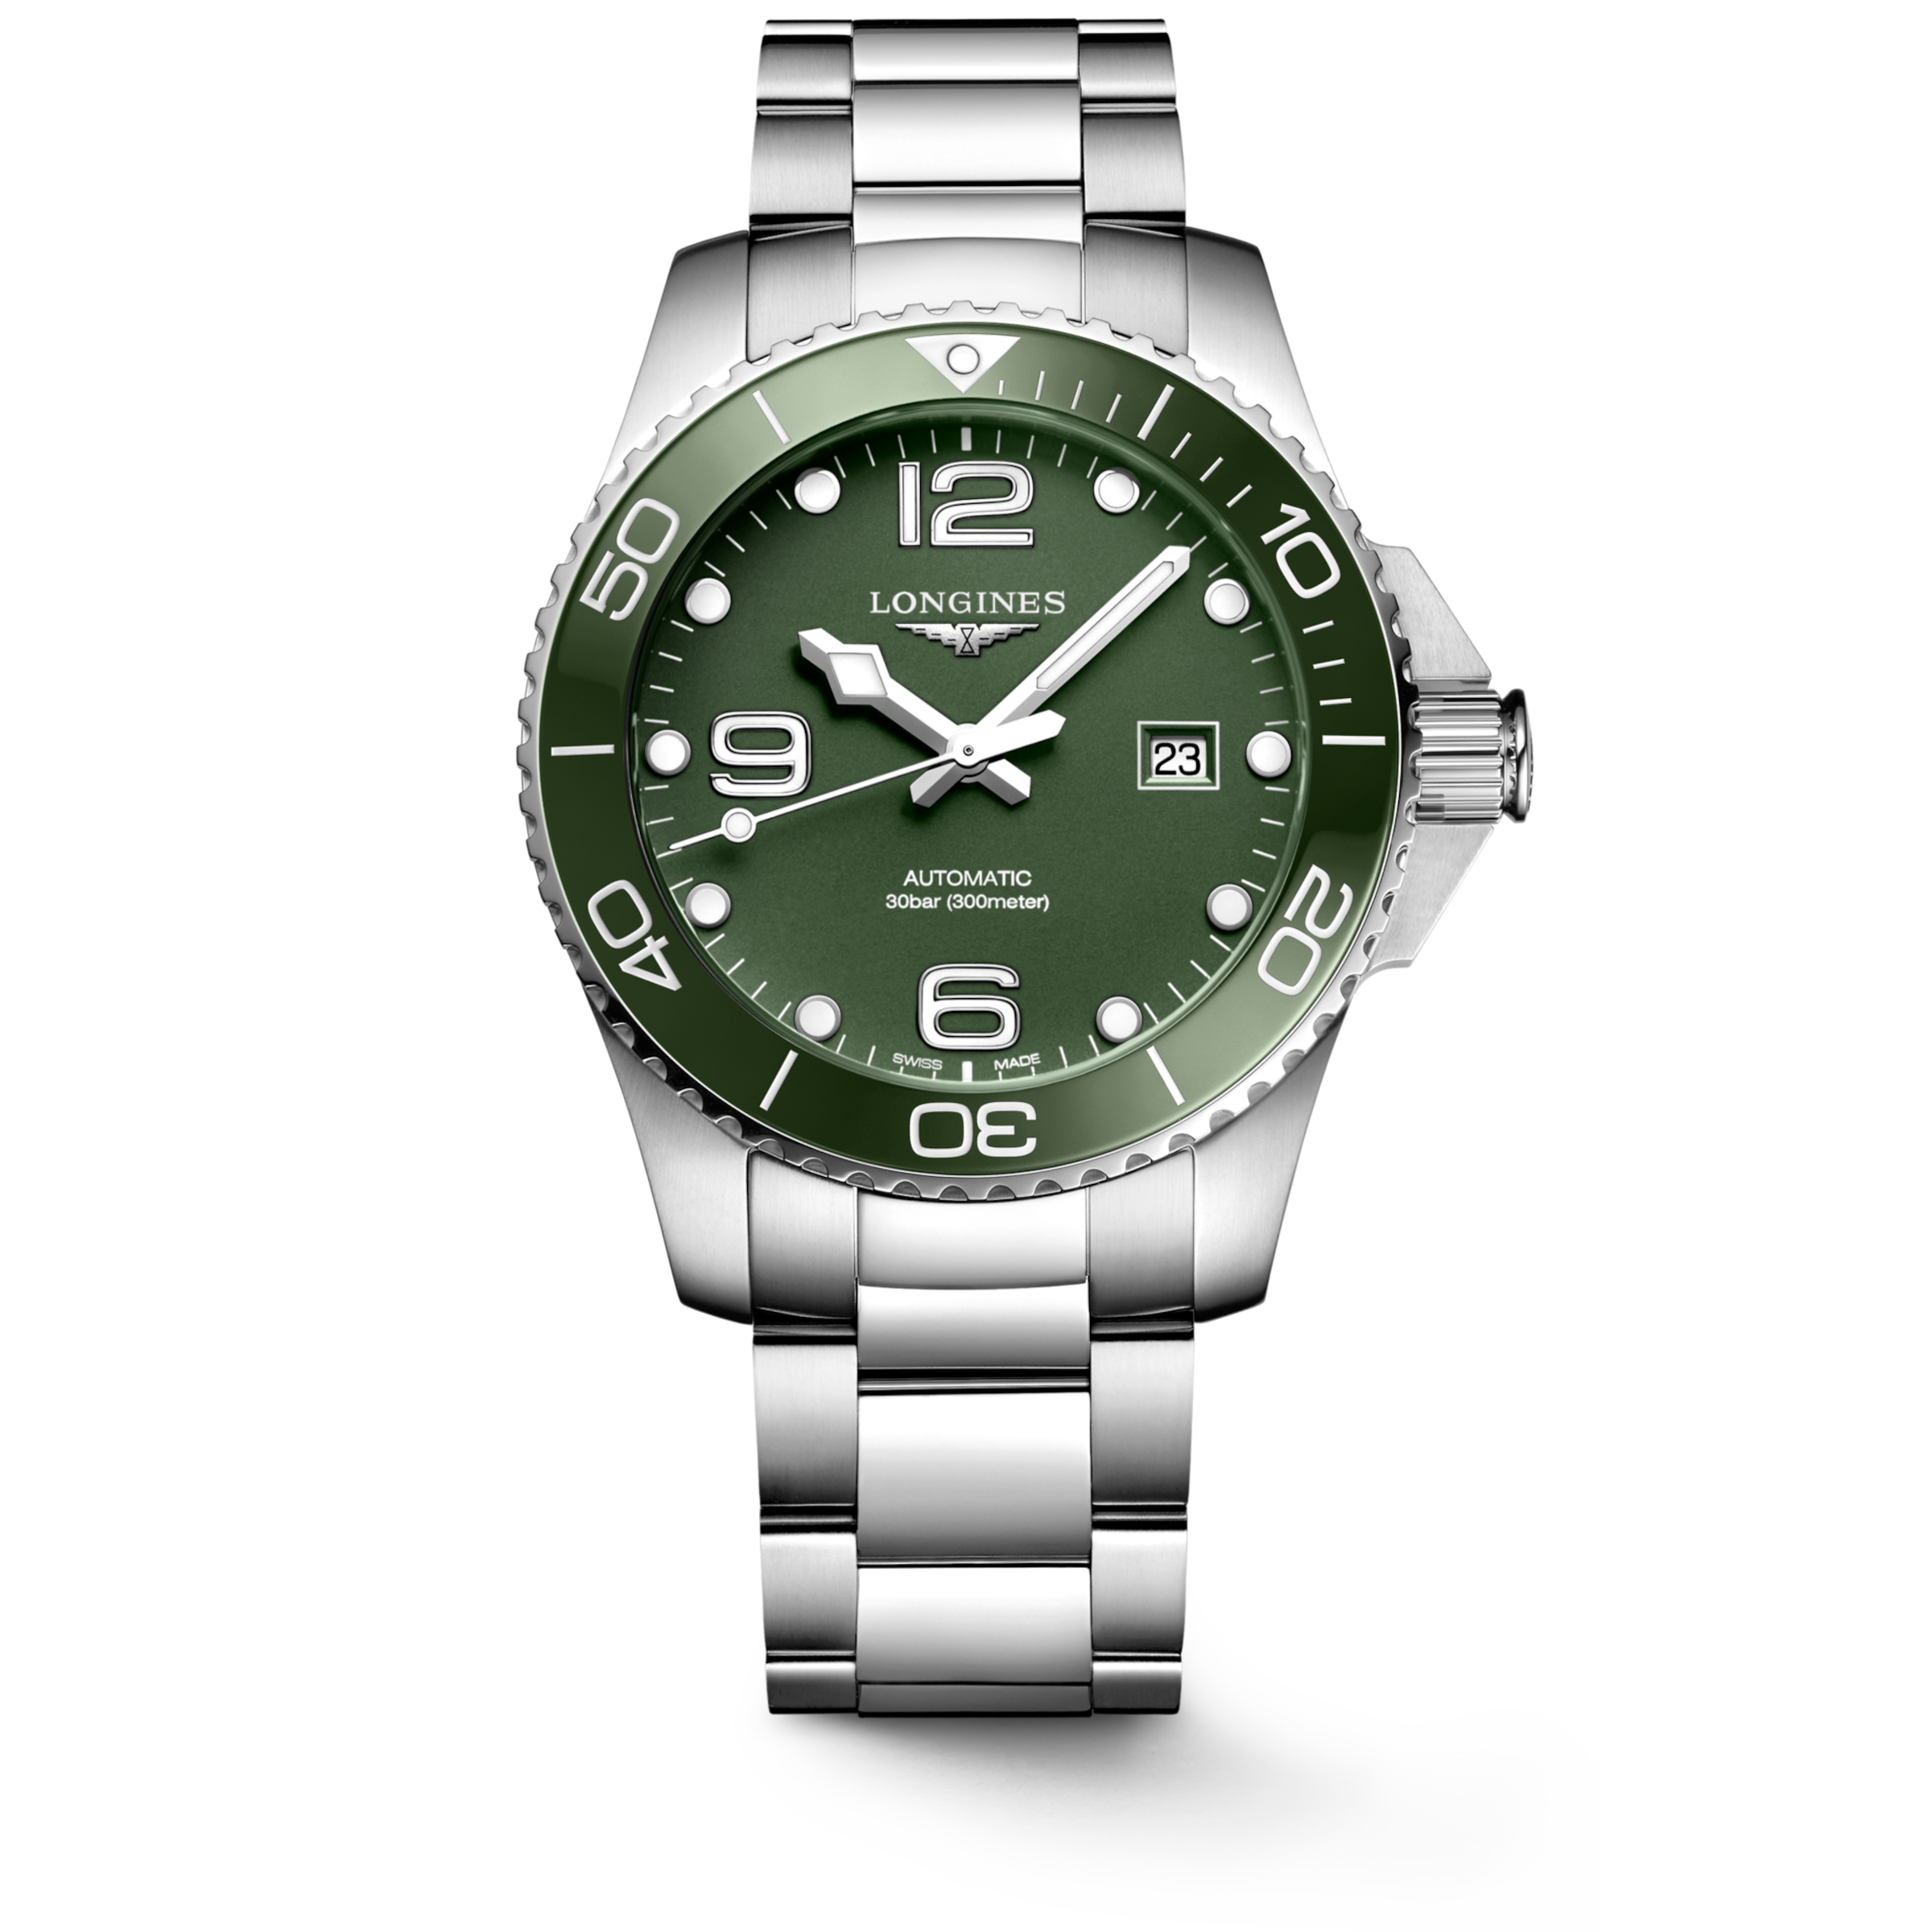 Longines HYDROCONQUEST Automatic Stainless steel and ceramic bezel Watch - L3.782.4.06.6